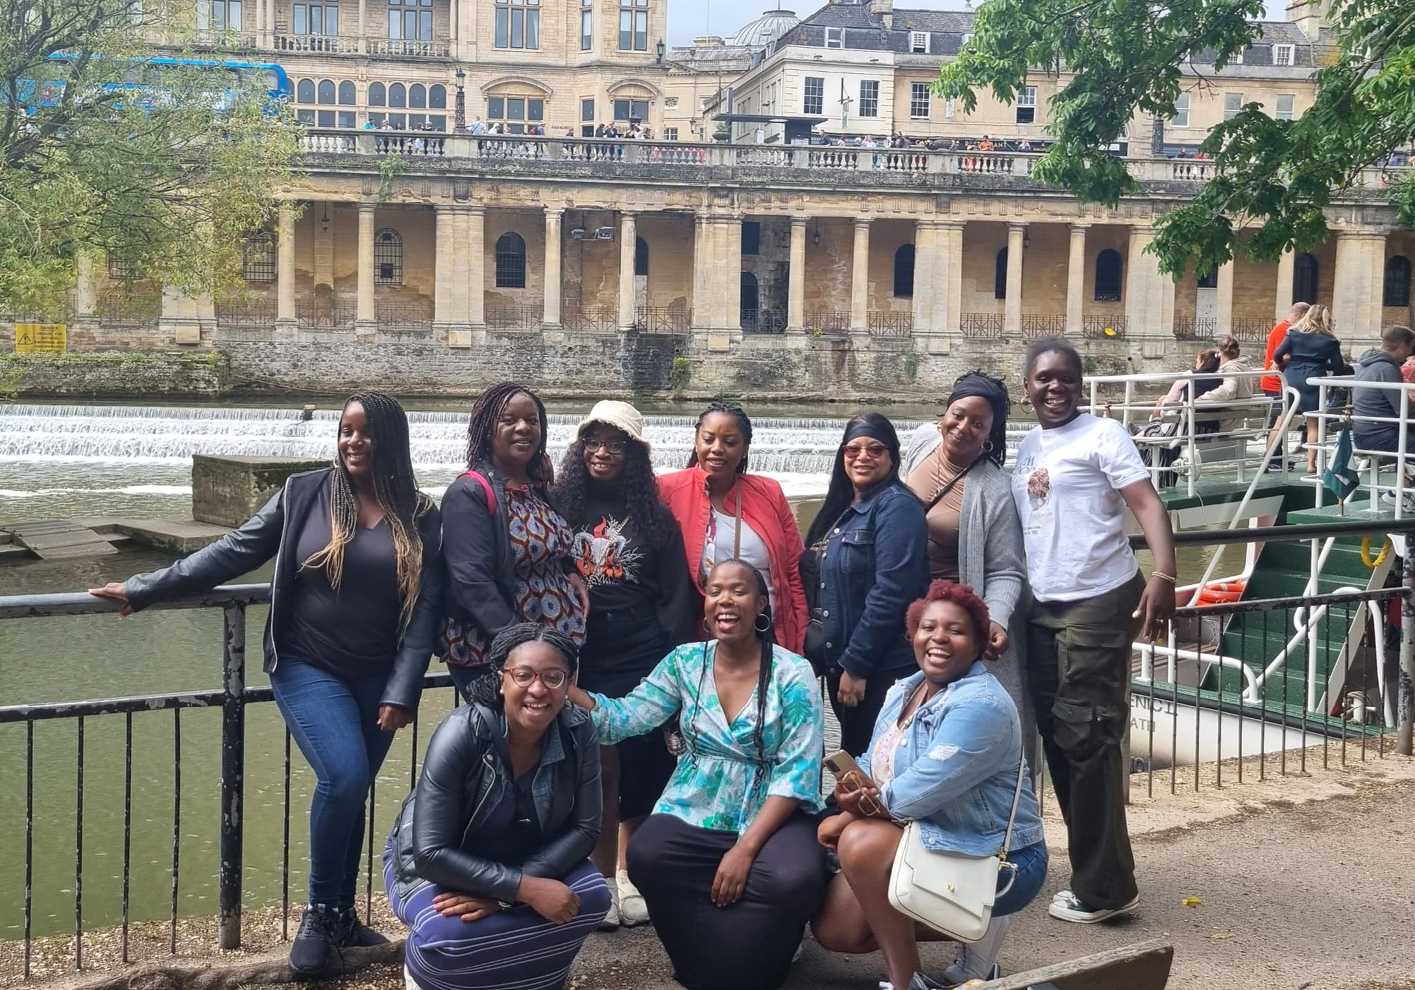 Black Girls Travel UK, founded by Danai Conquers